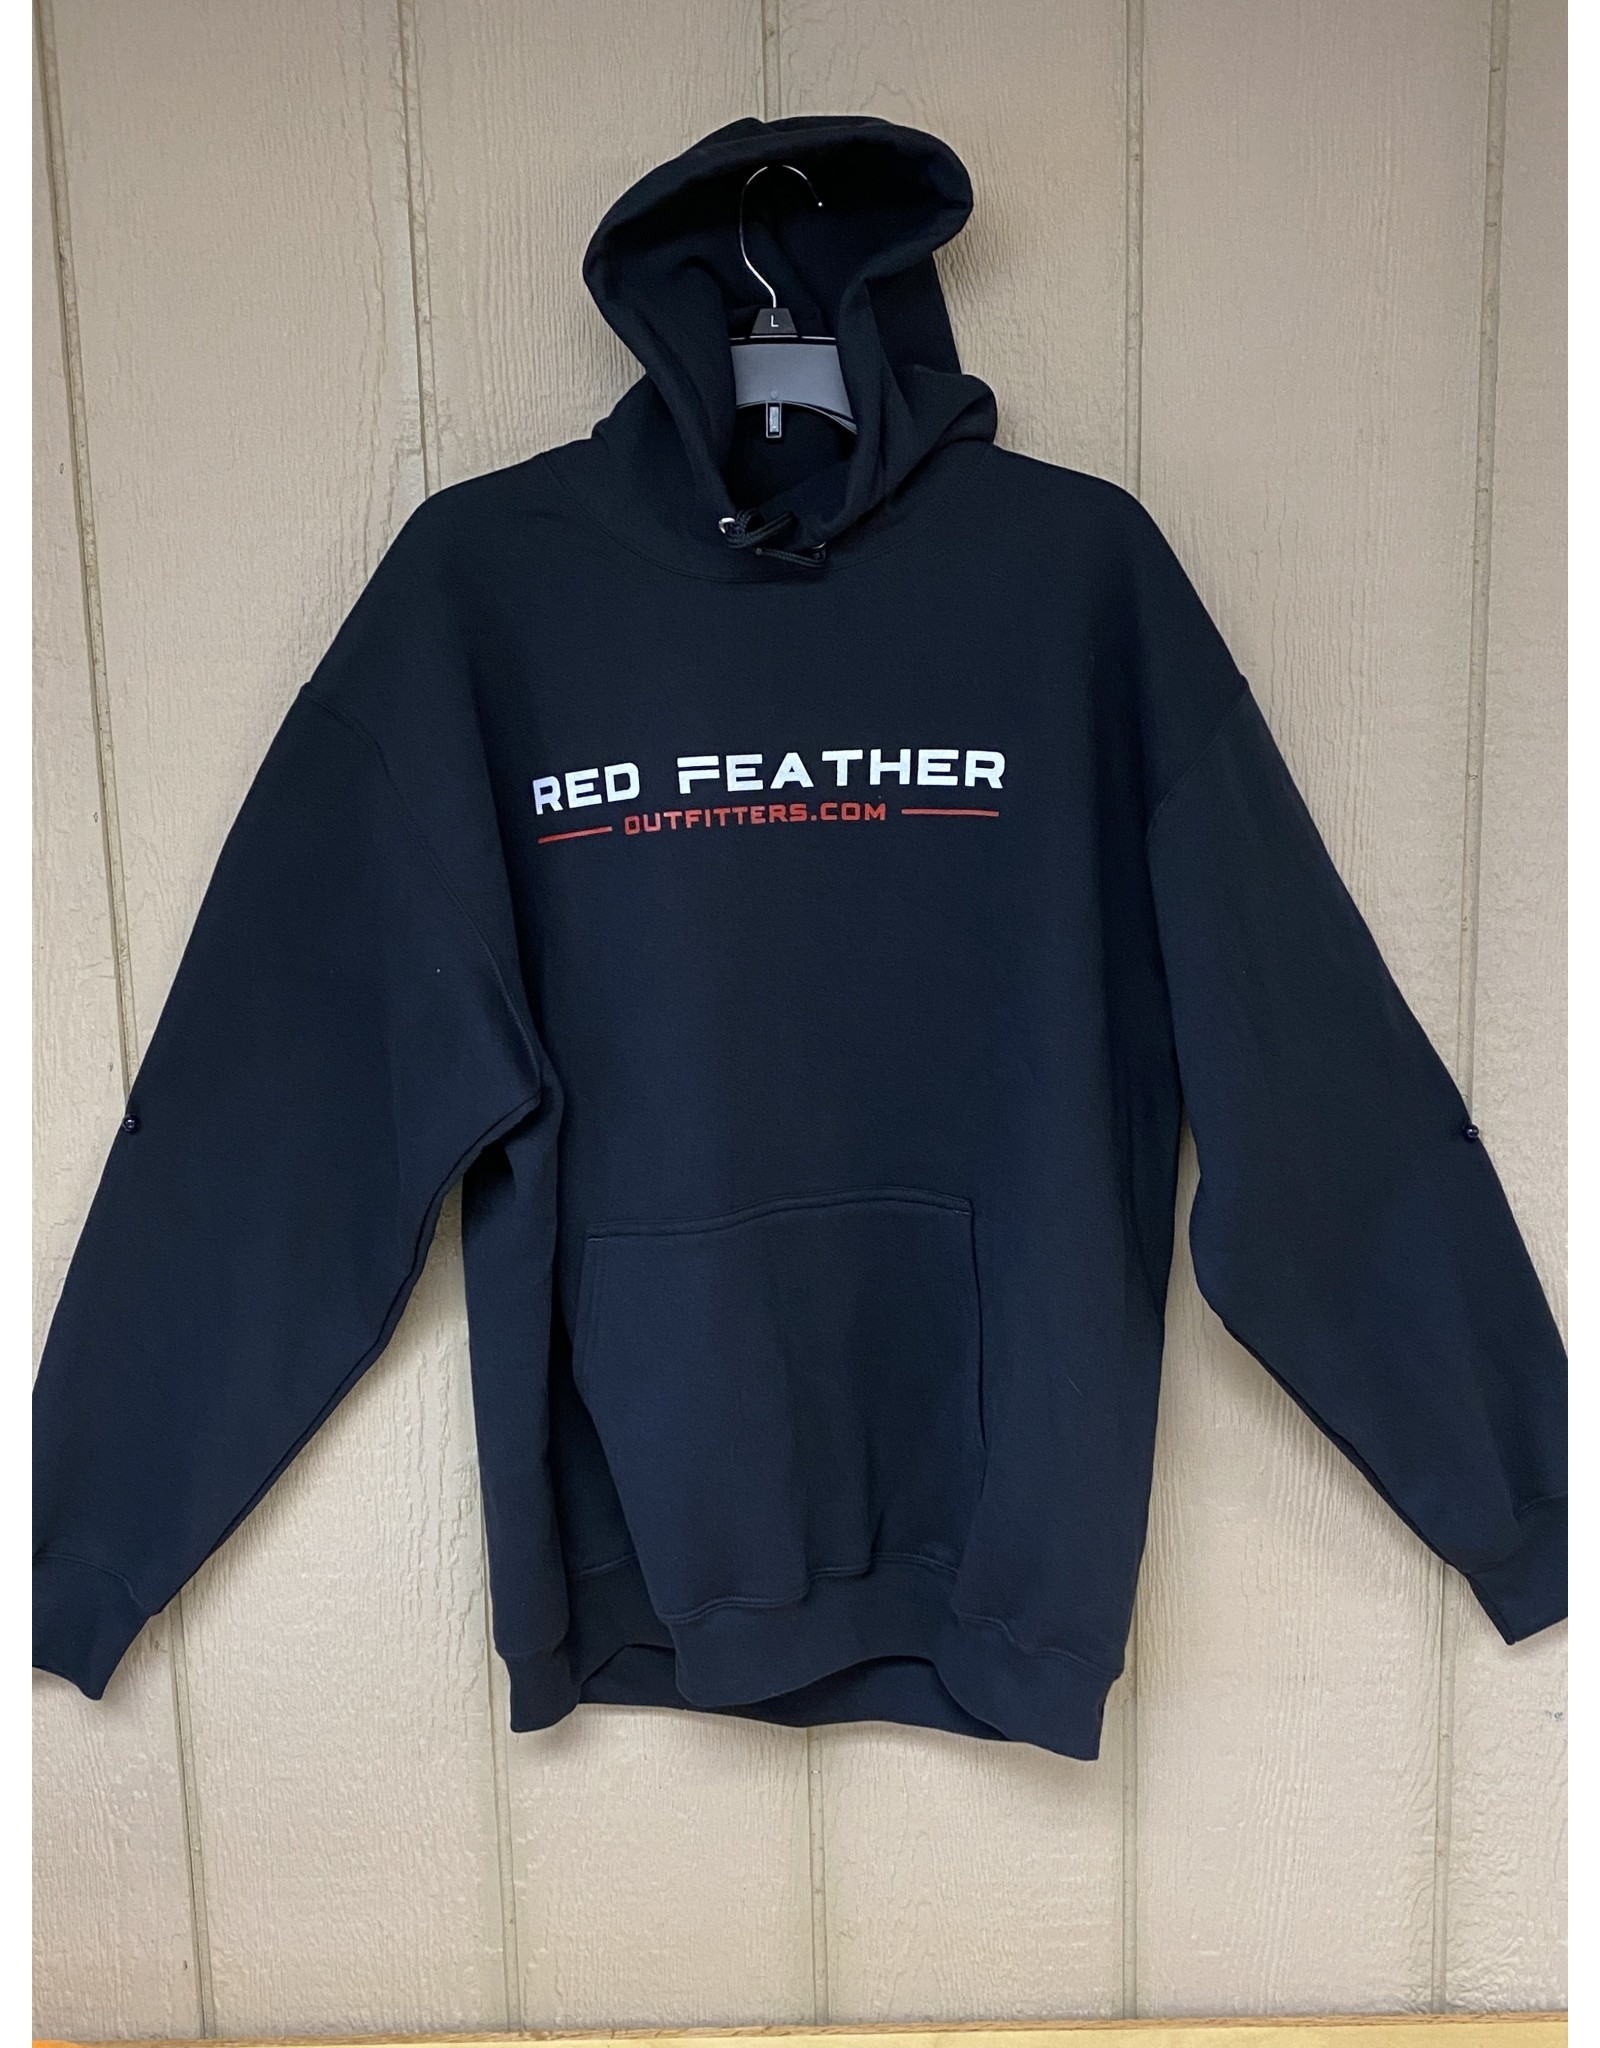 Hoodie, Red Feather Outfitters, XLarge TALL